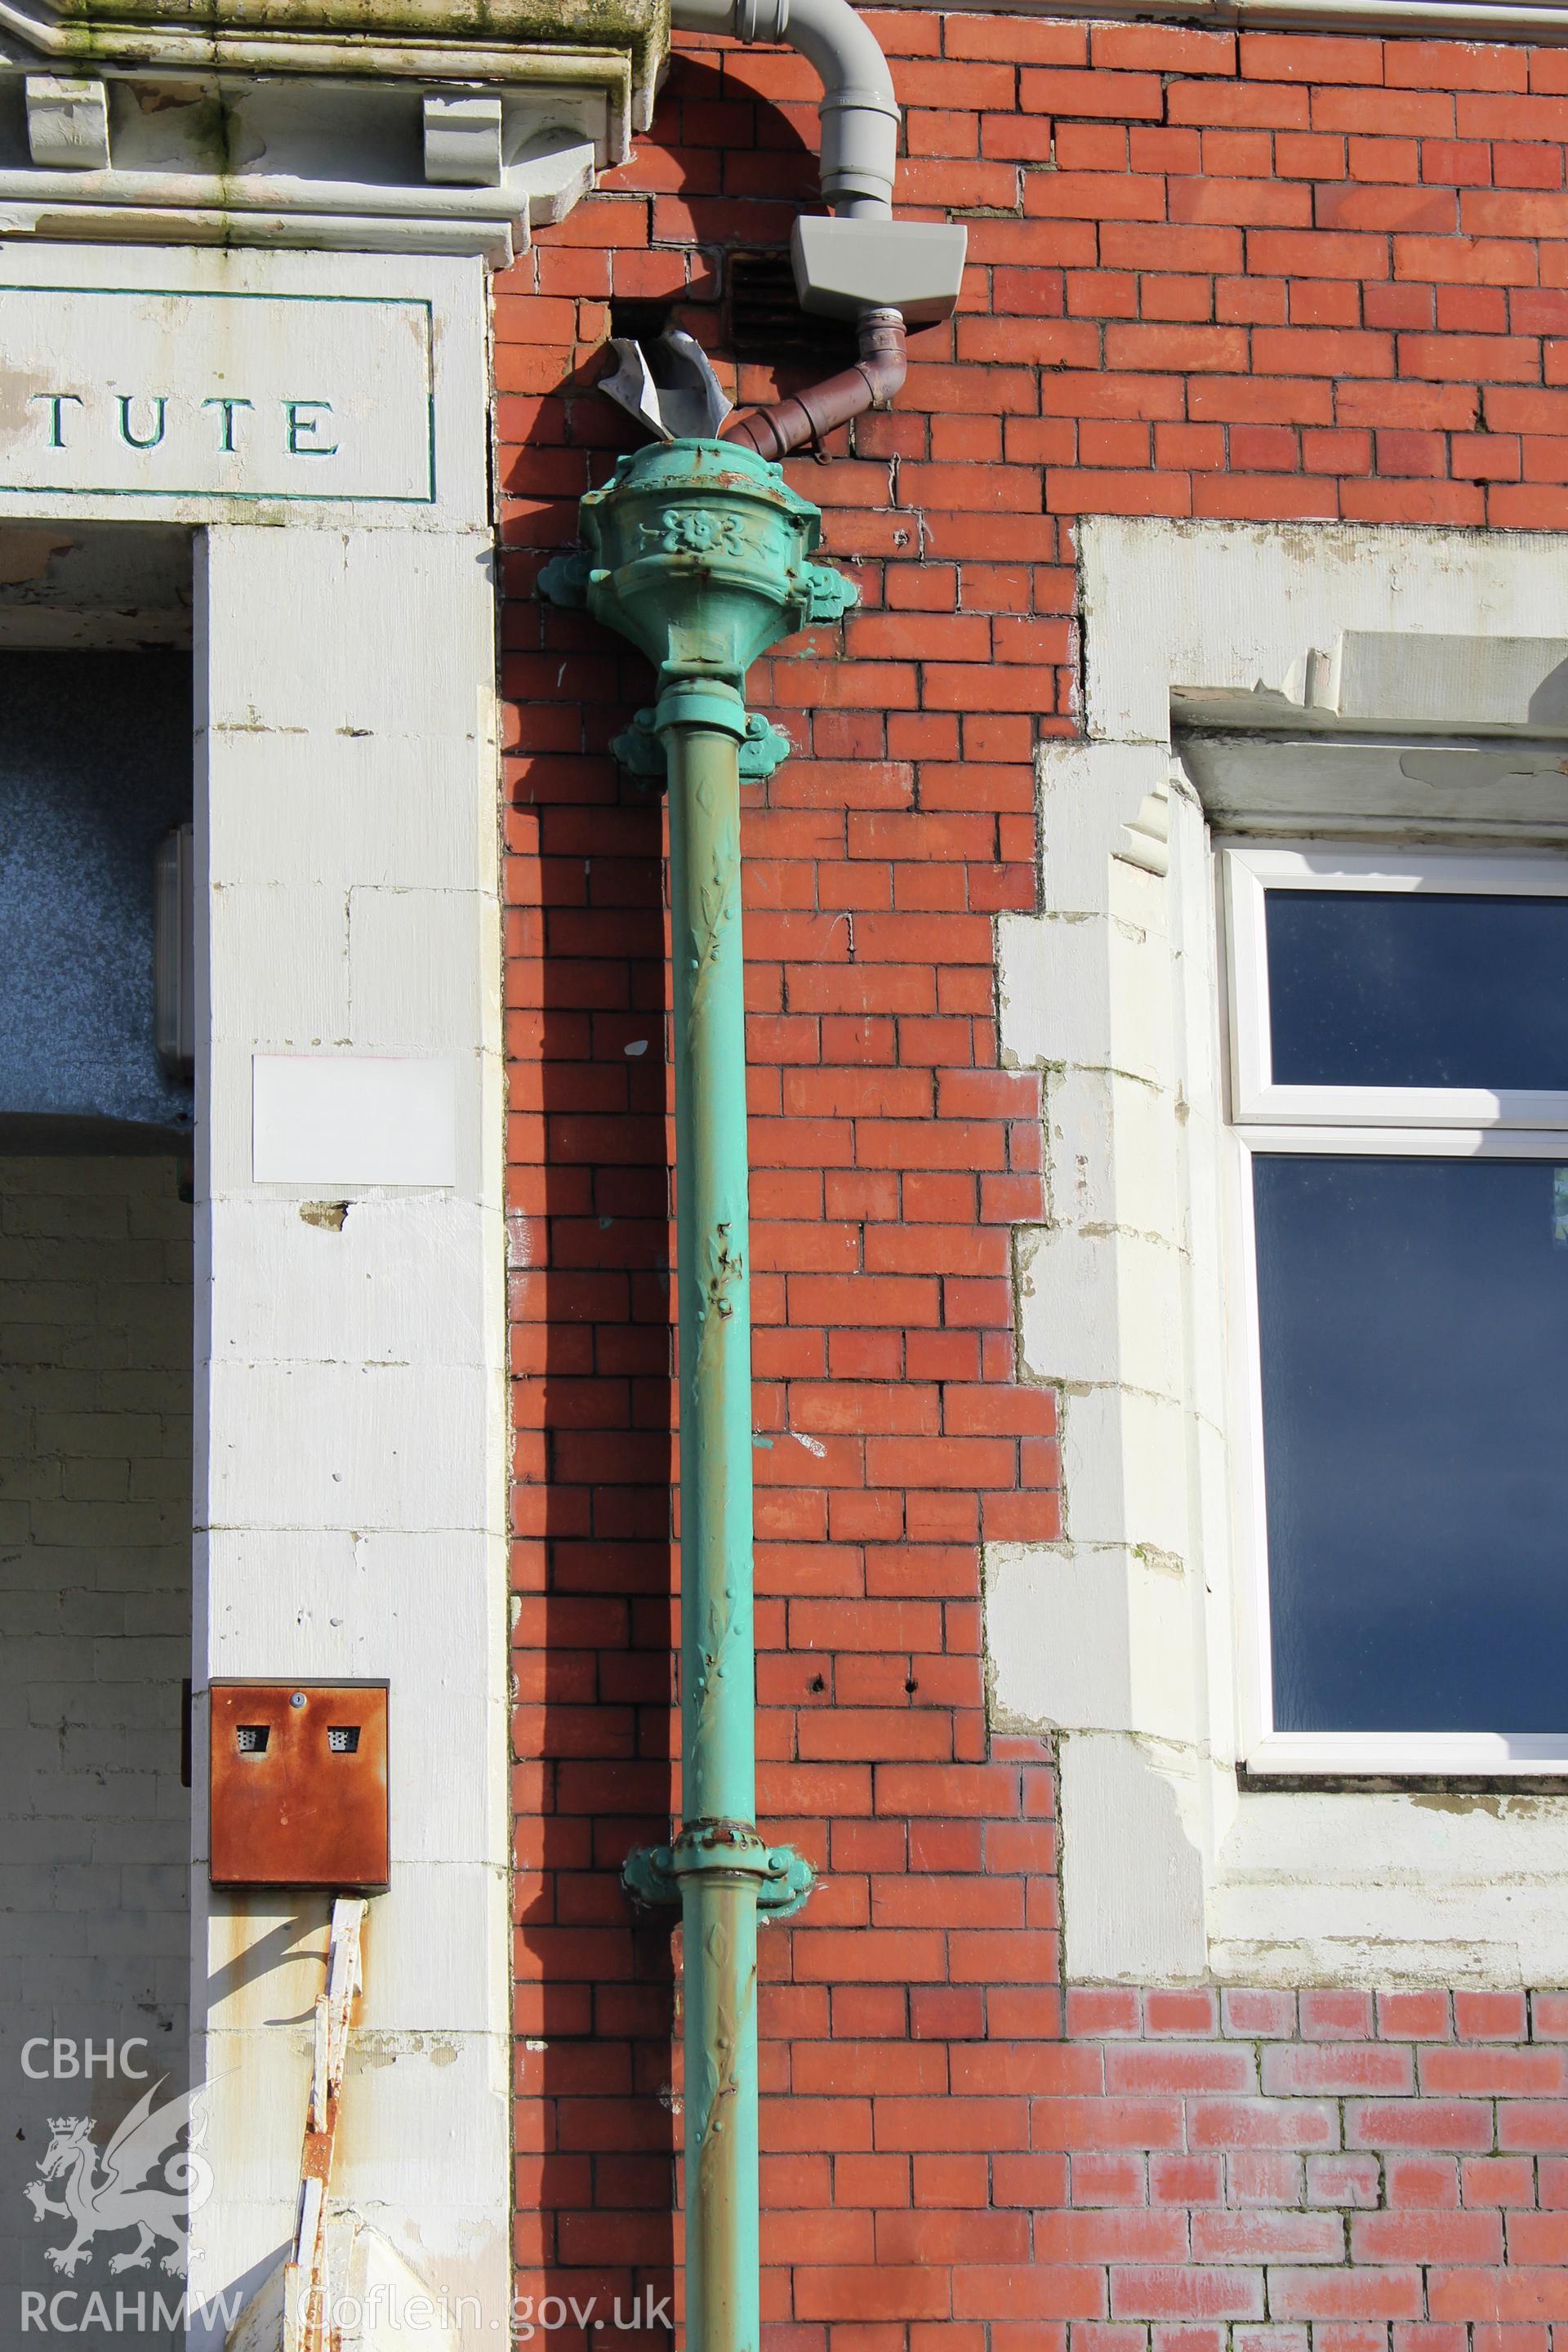 Detailed view of drainpipe next to entrance at front elevation of the Railway Institute, Bangor. Photographed during survey conducted by Sue Fielding for the RCAHMW on 4th April 2016.